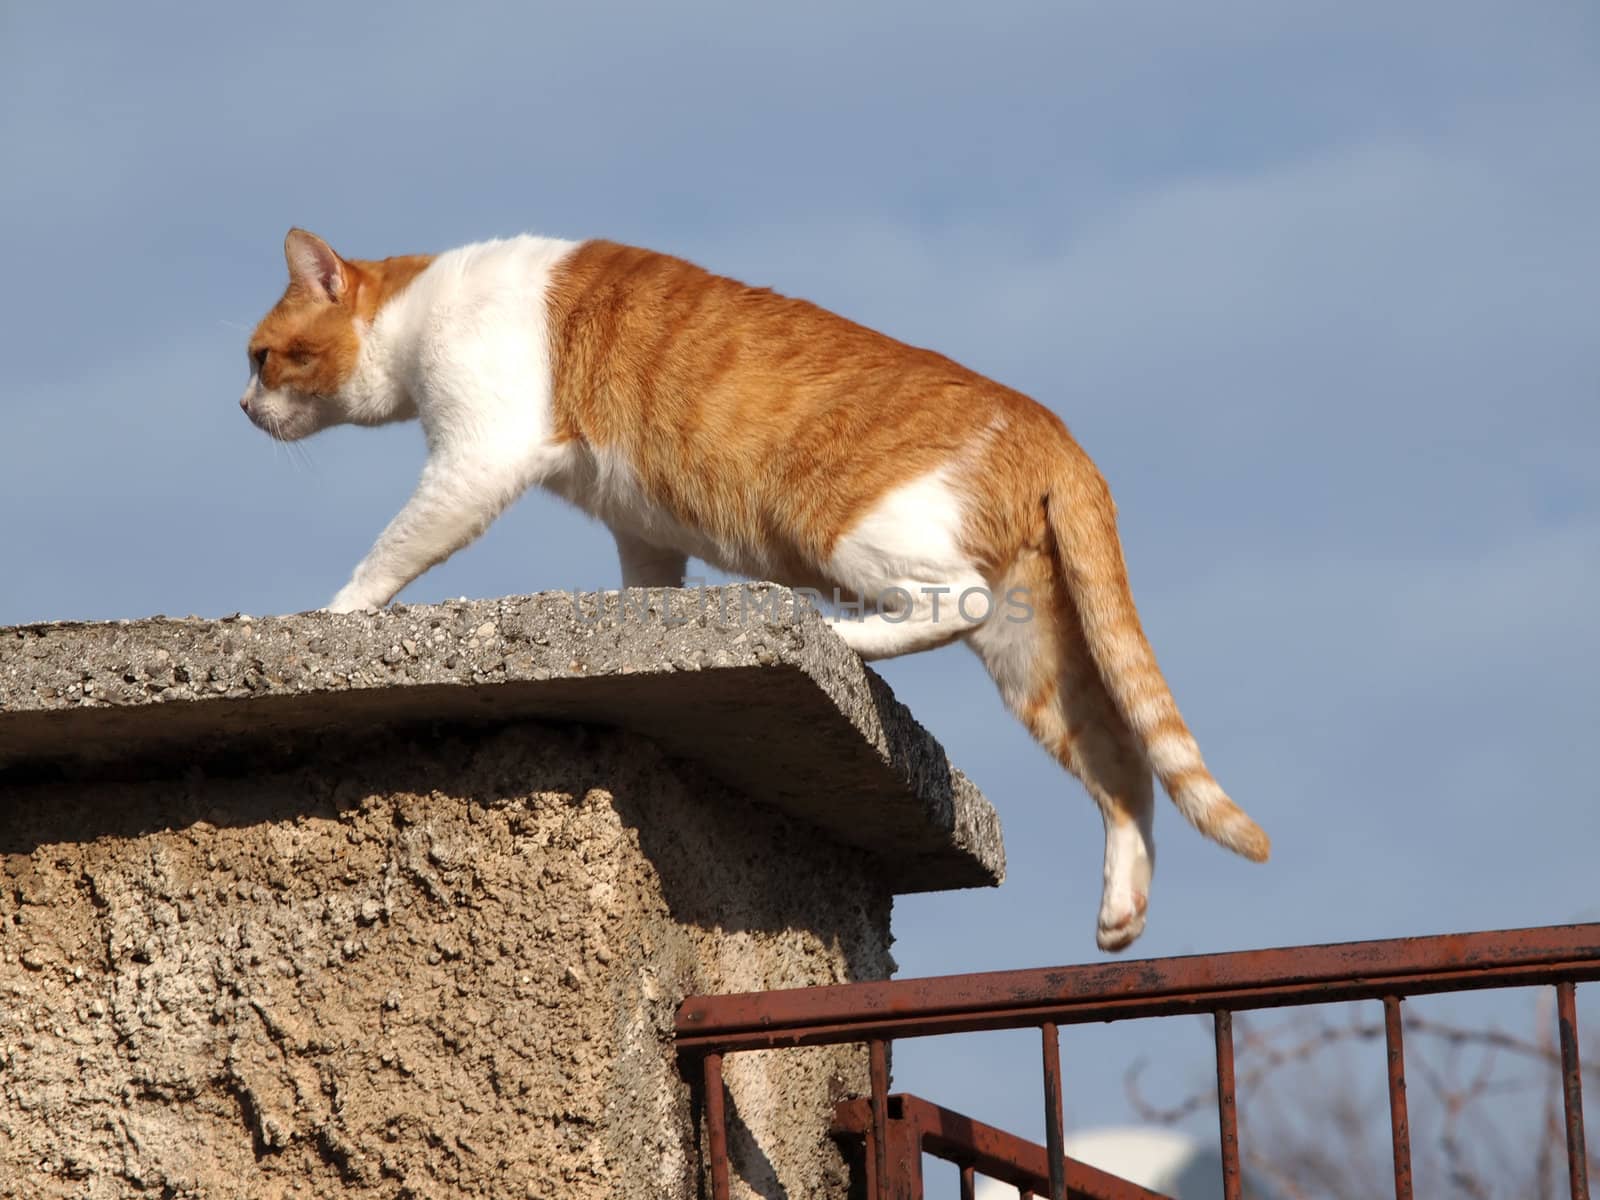 cat walking and balancing on the fence       